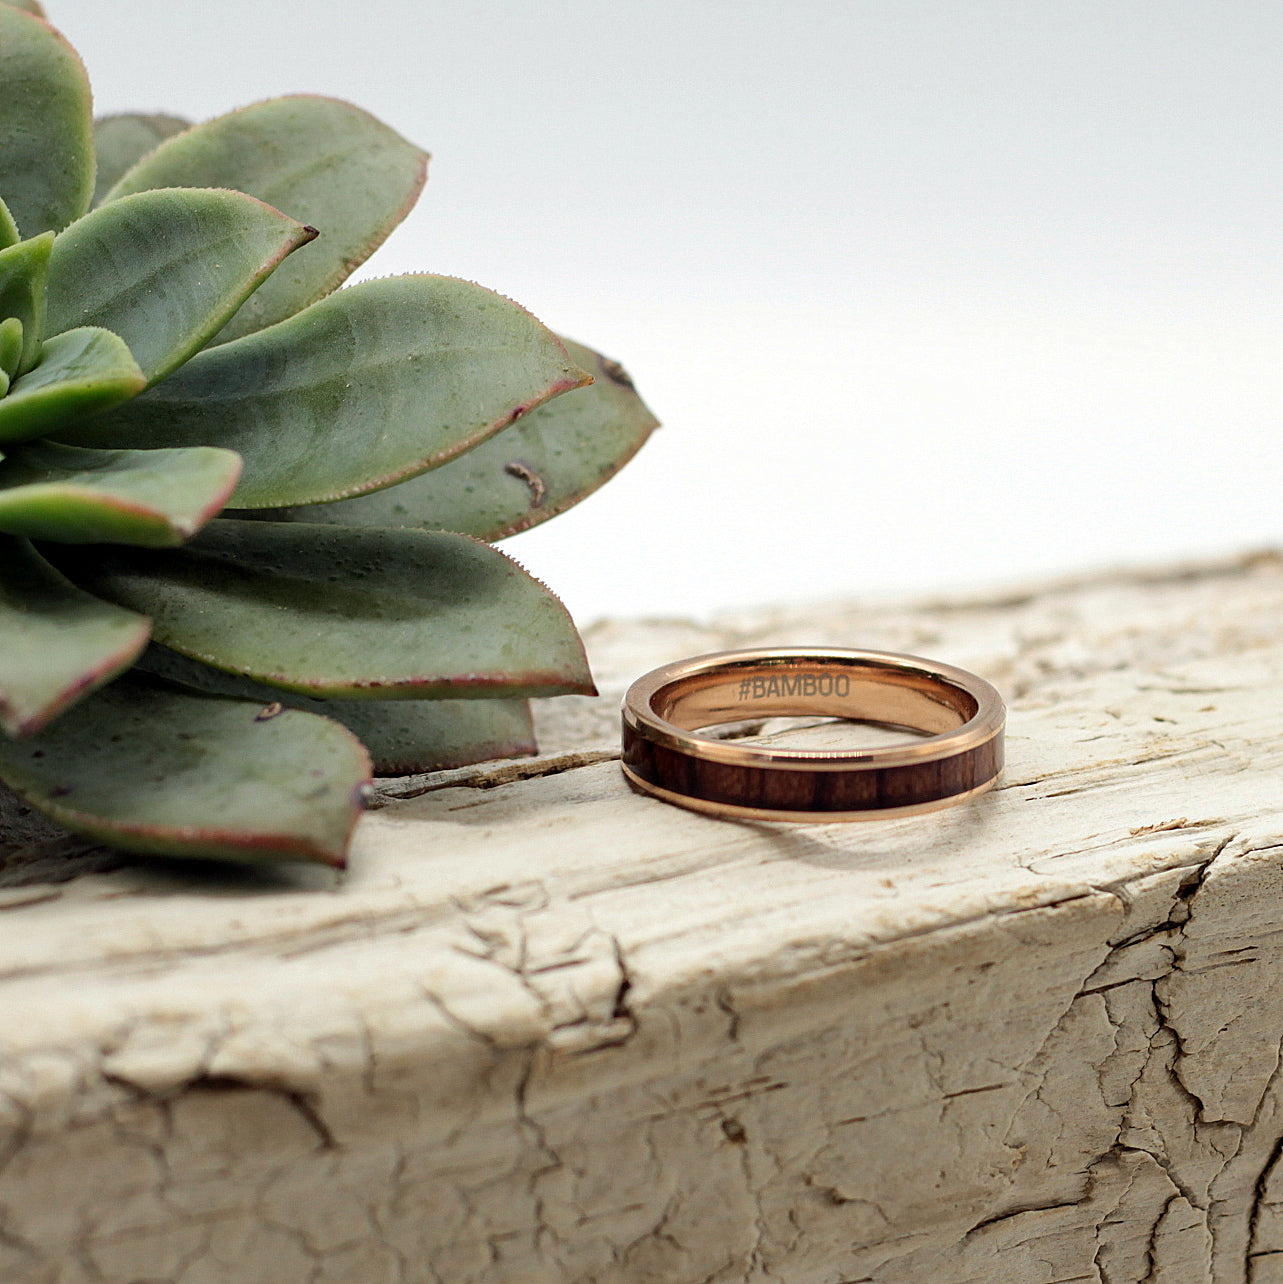 Ladies rose gold tungsten ring with koa wood inlay, 4mm band, matching men's ring available, Hashtag Bamboo, orbit rings.